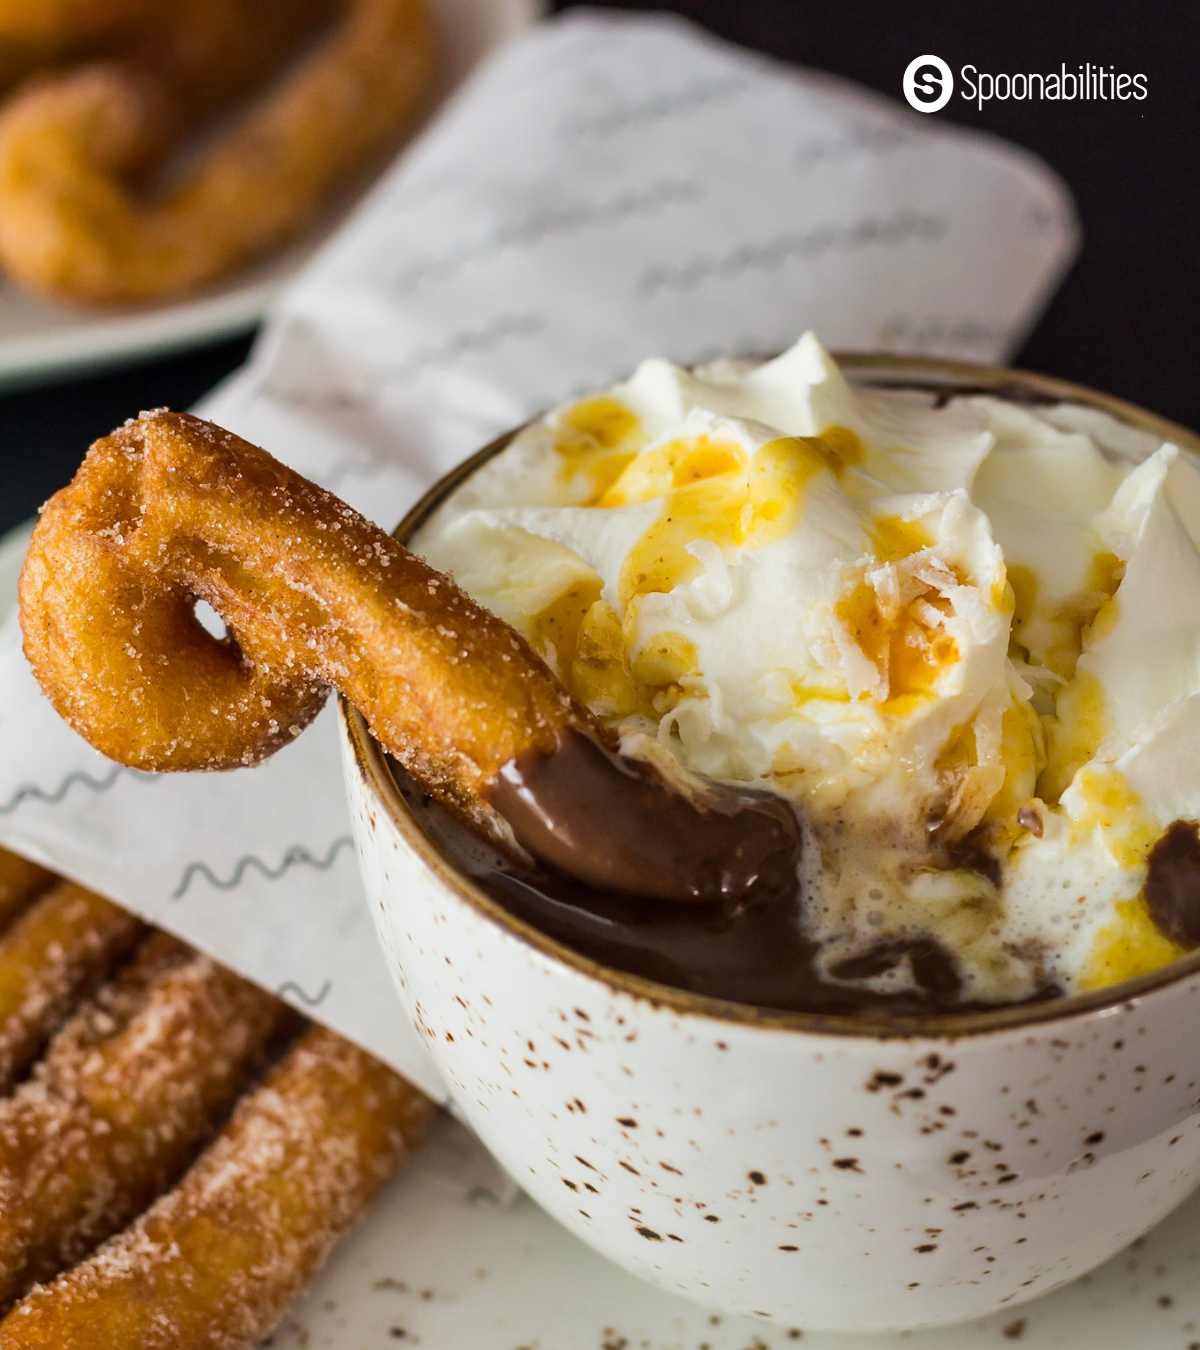 Sugary churros dipped in a cup of thick hot chocolate with cream on top